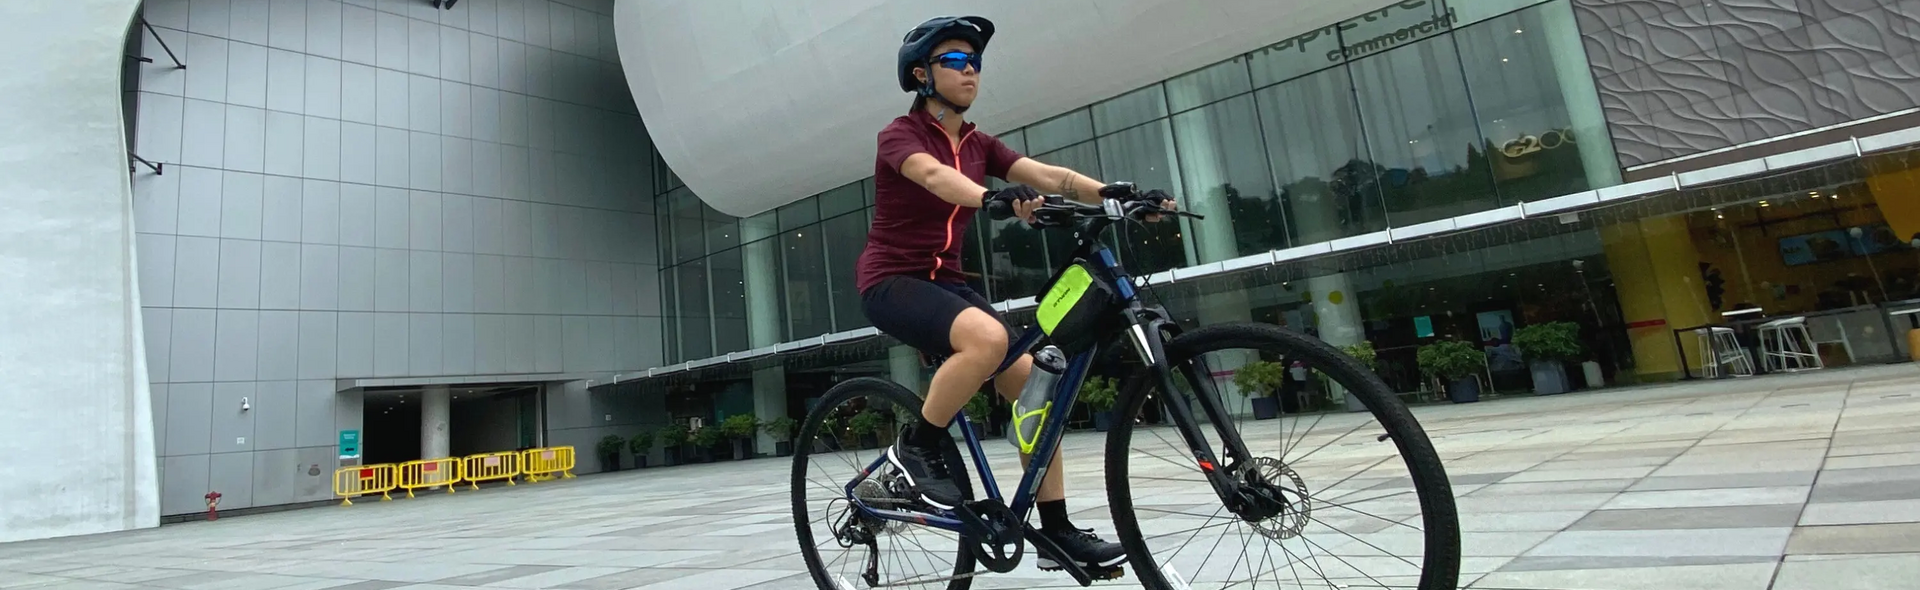 GUIDE TO SINGAPORE ROUND ISLAND CYCLING ROUTE